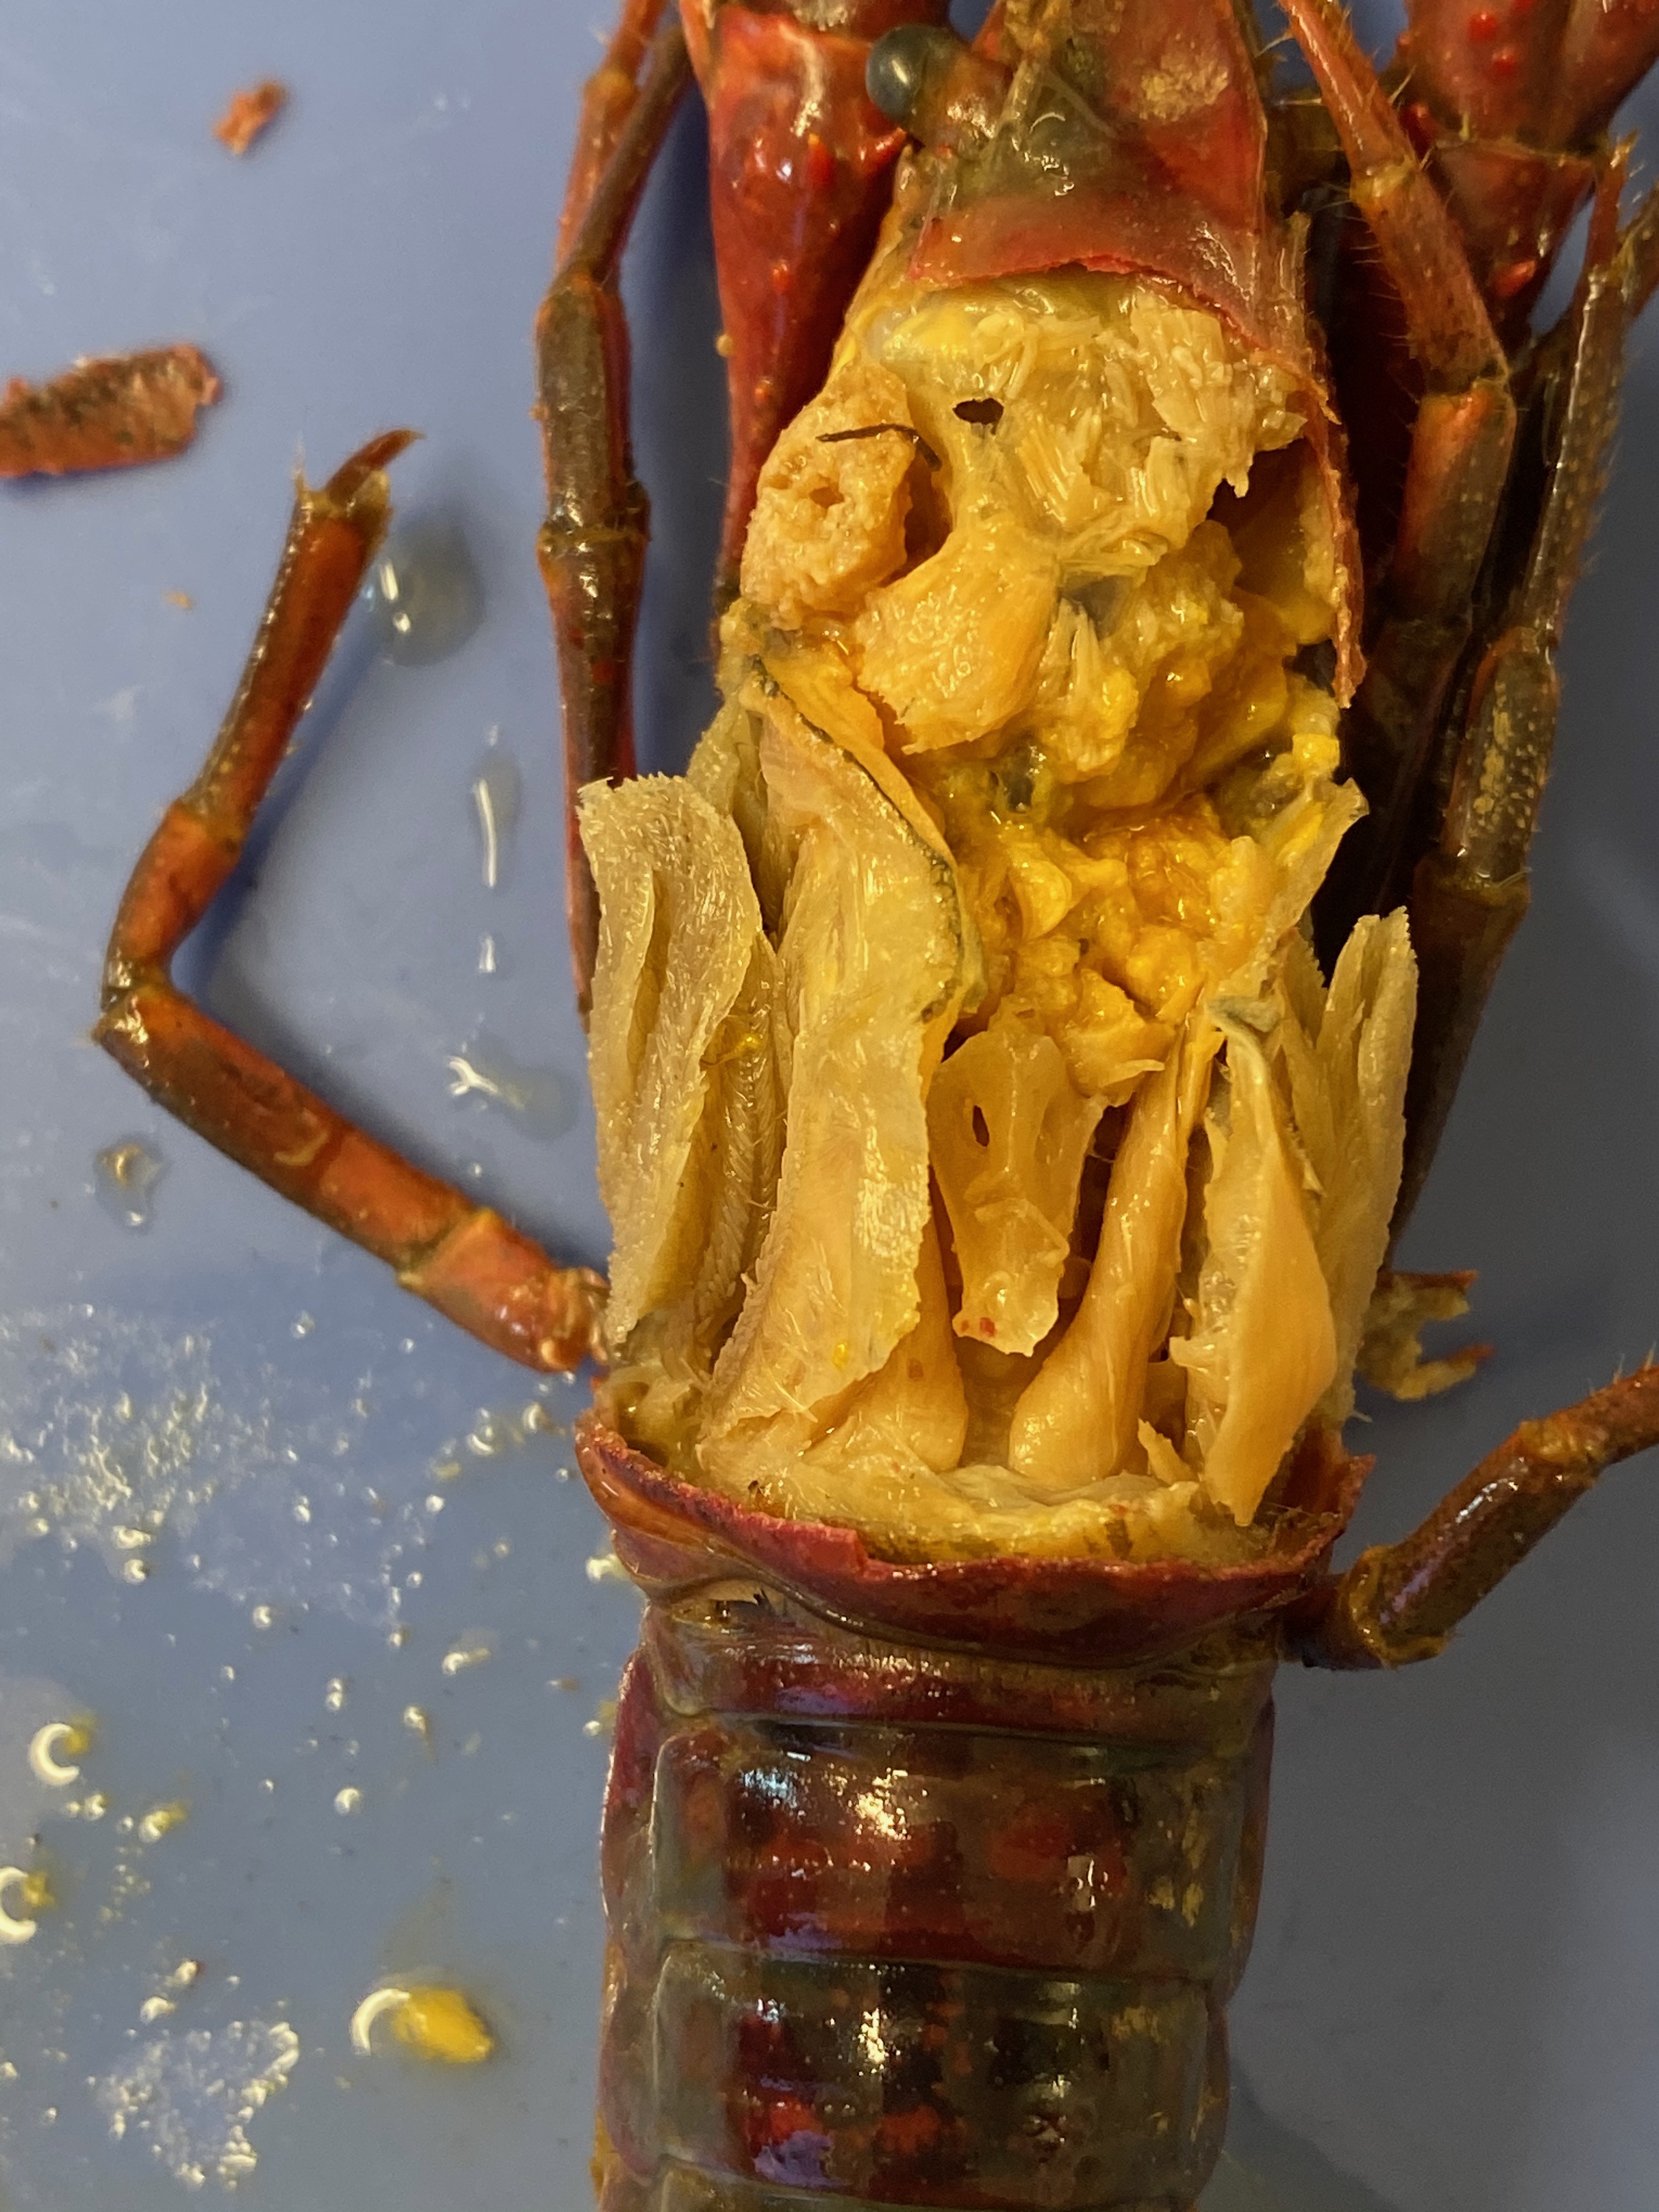 The crayfish heart. Notice the holes in the lateral walls.